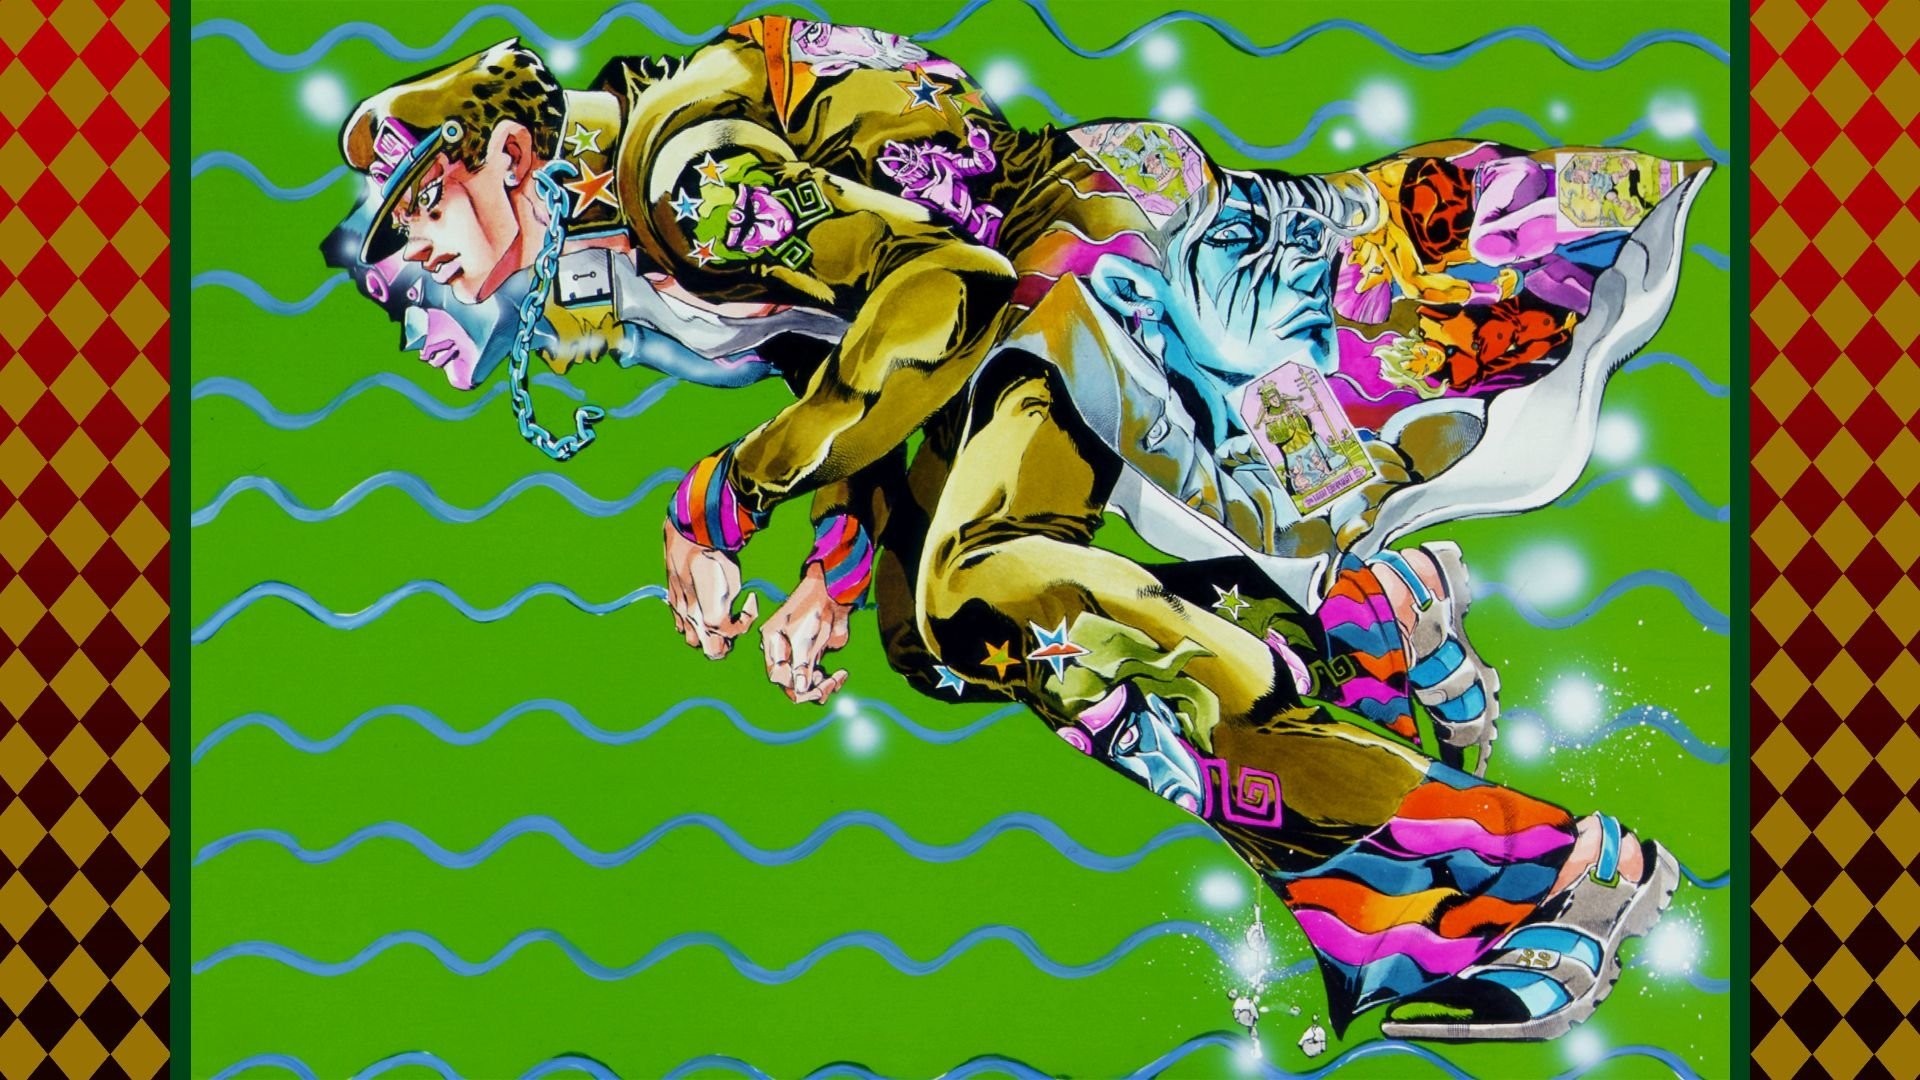 Jojo Bizarre Adventure wallpaper ·① Download free awesome full HD wallpapers for desktop and ...